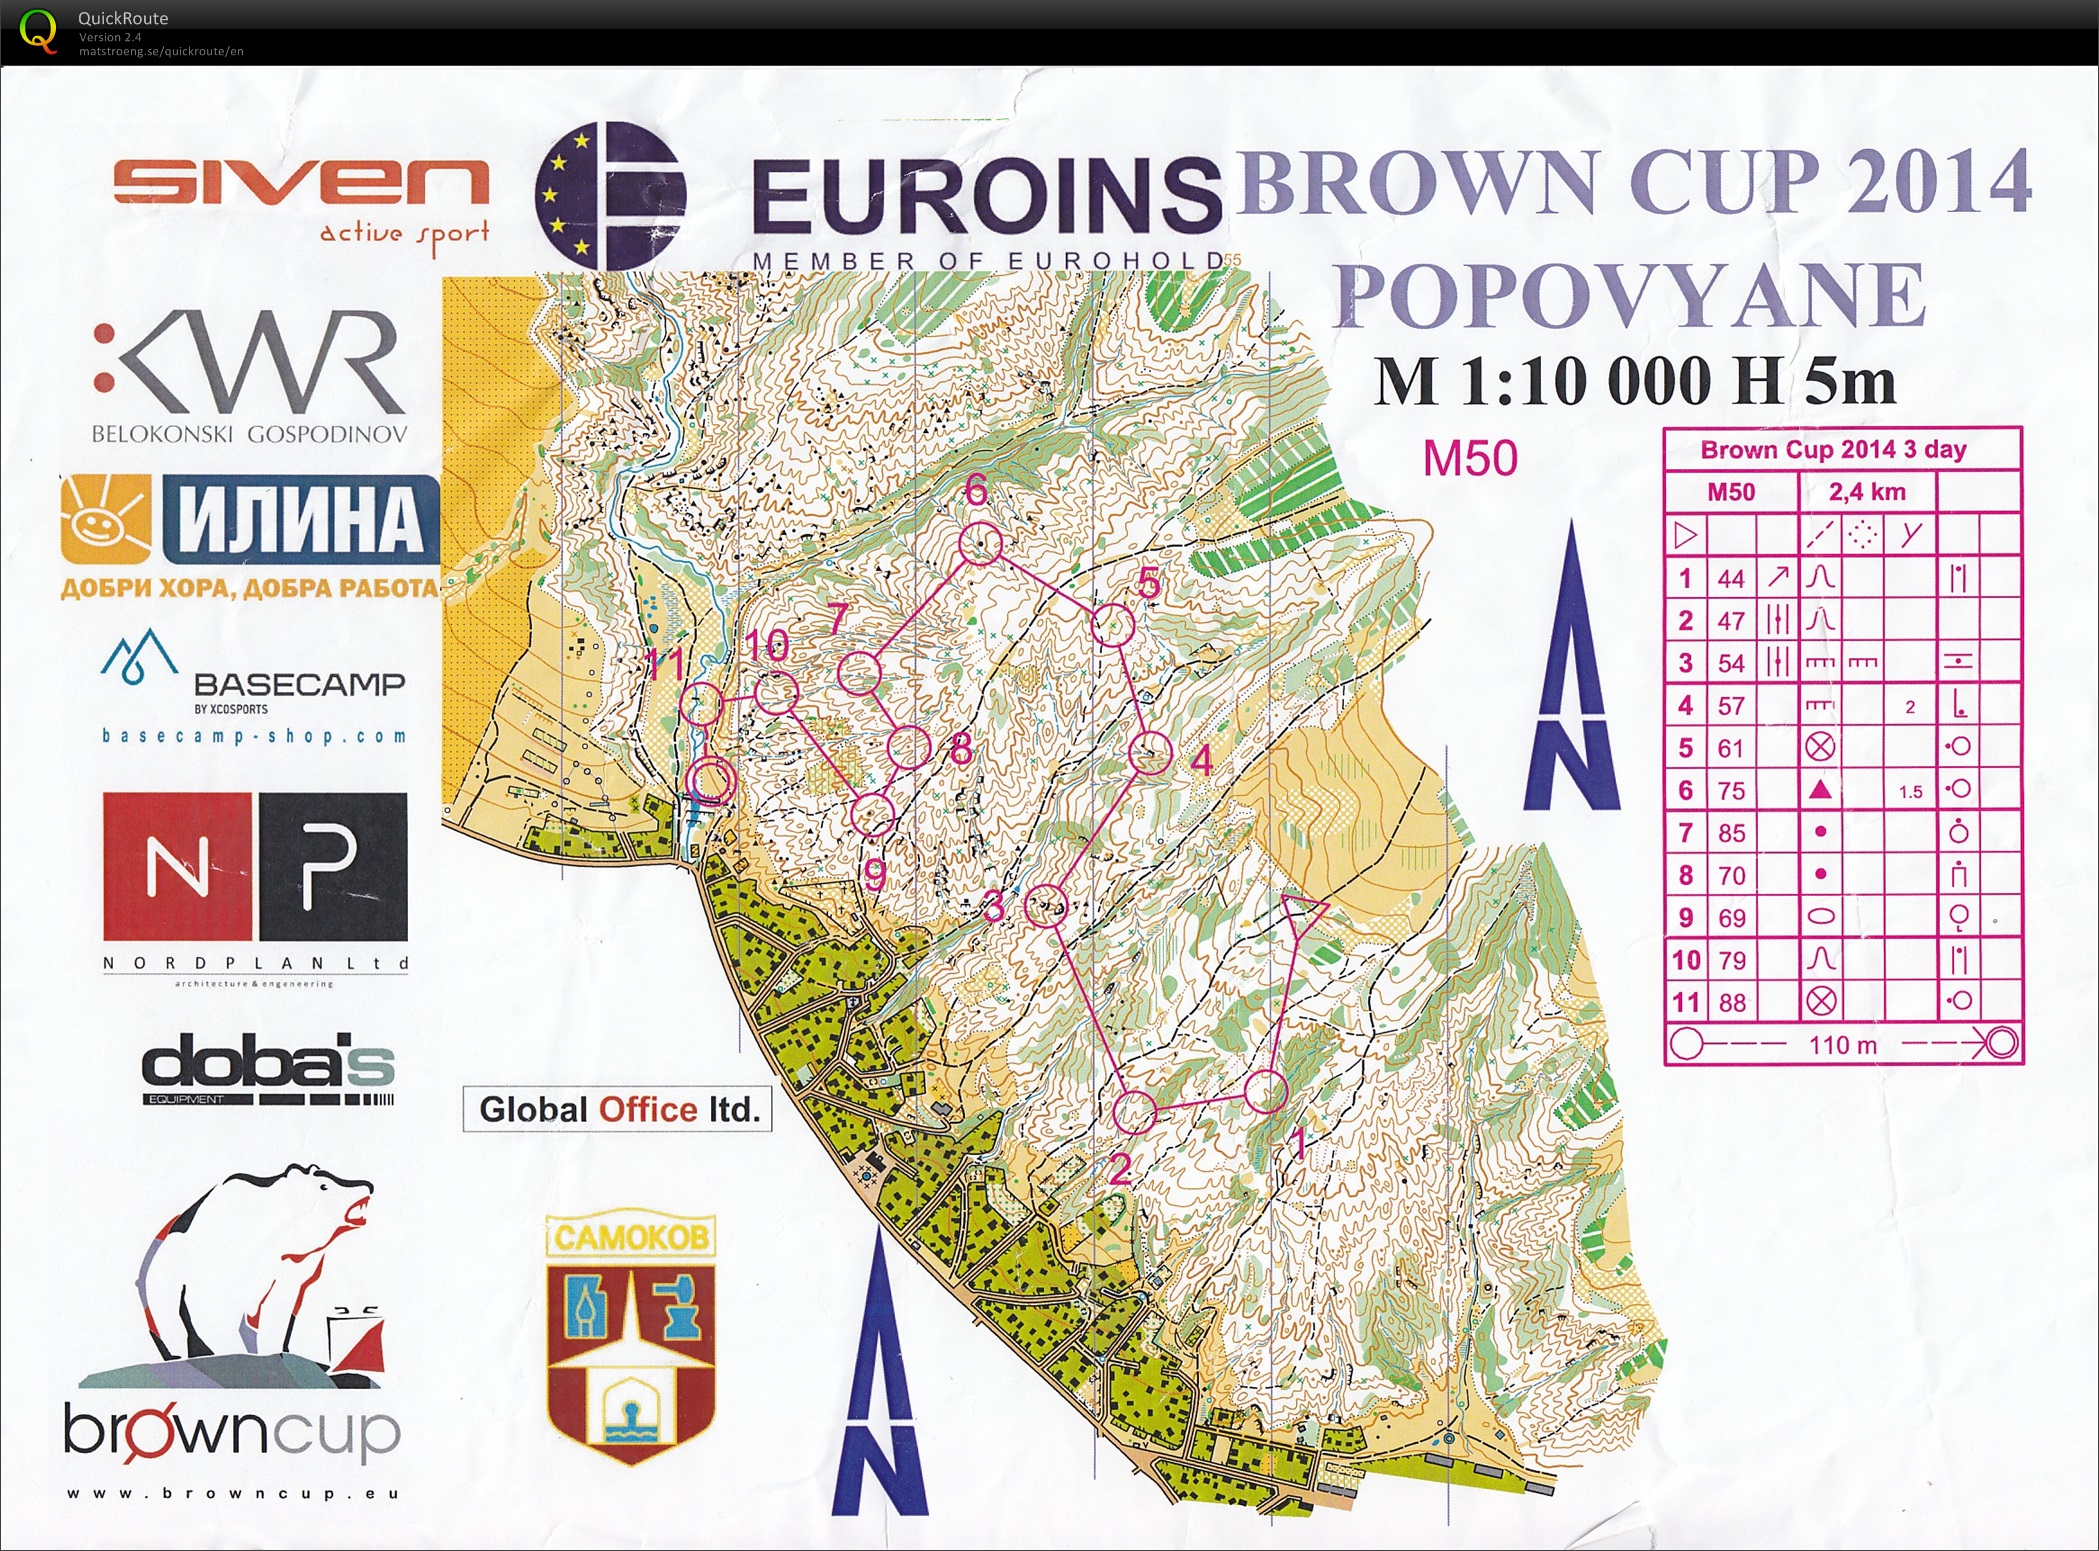 Brown-Cup 2014 E3 (05.05.2014)